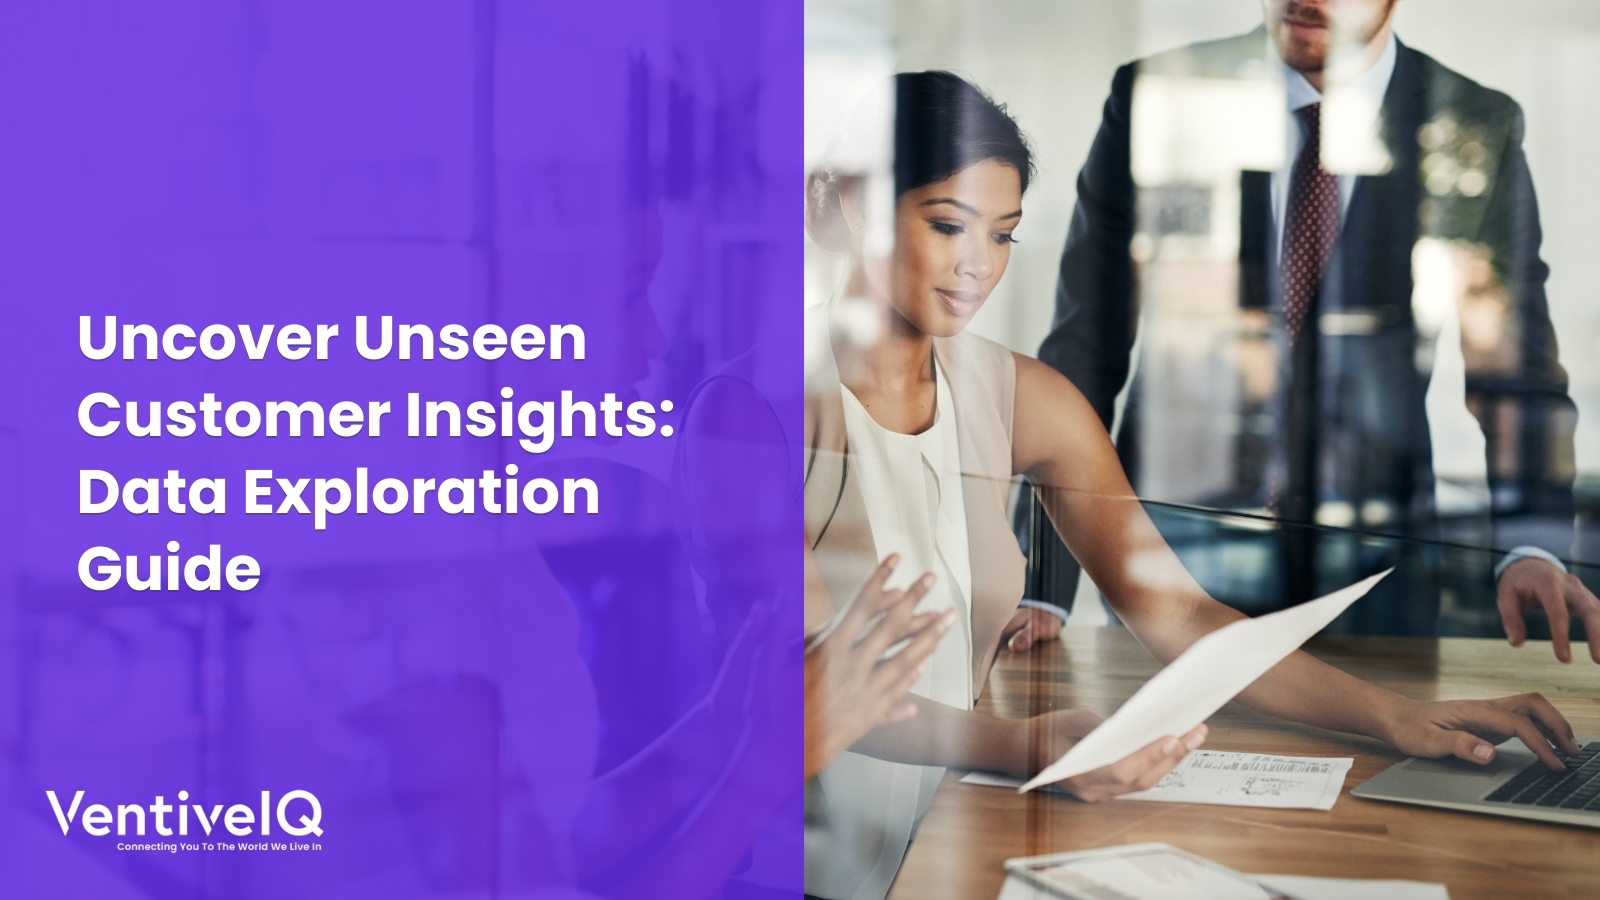 Uncover Unseen Customer Insights: Data Exploration Guide